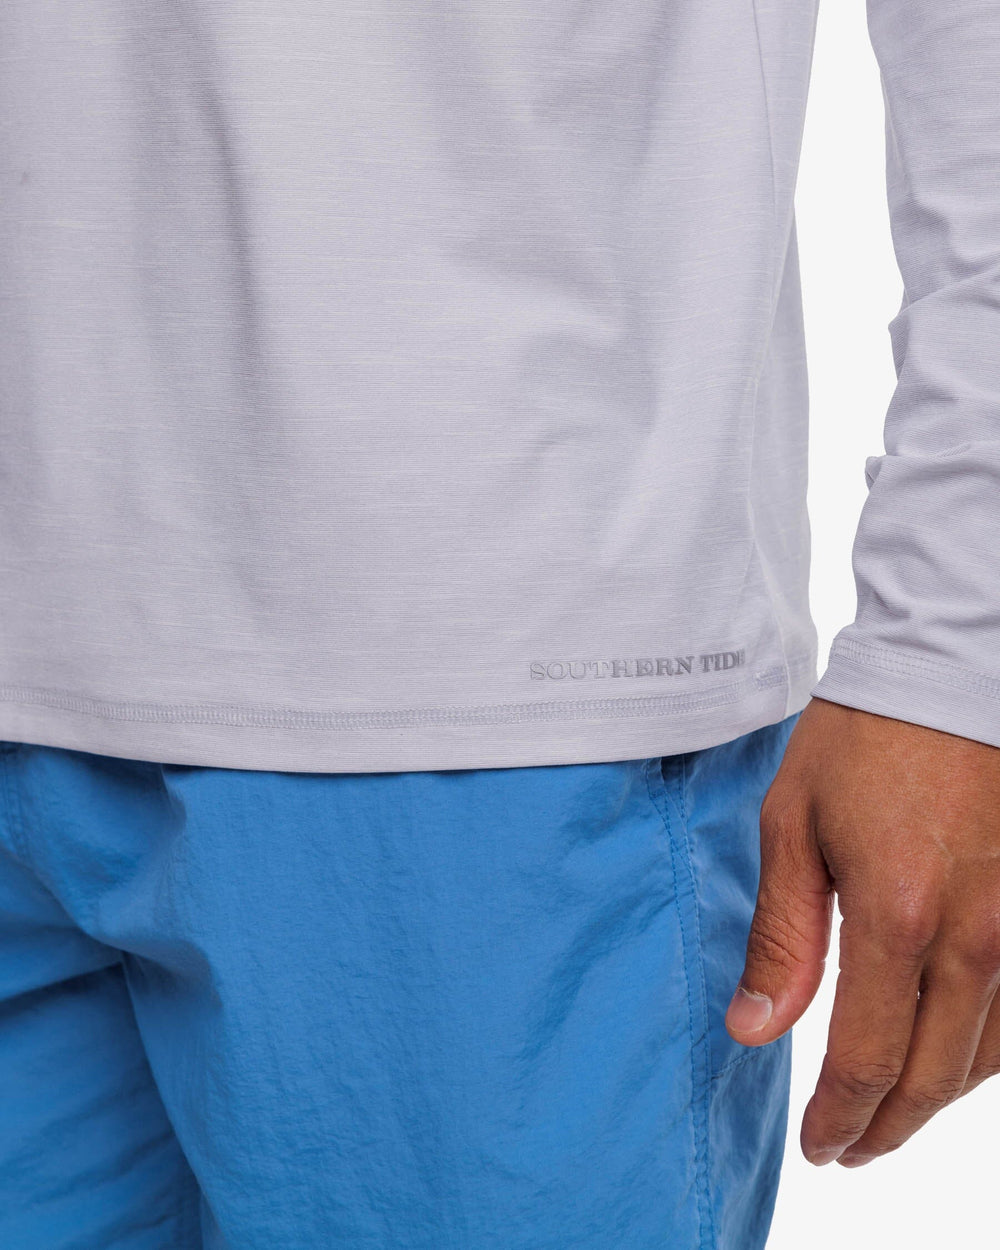 The label view of the Southern Tide brrr-illiant Performance Long Sleeve Tee by Southern Tide - Platinum Grey